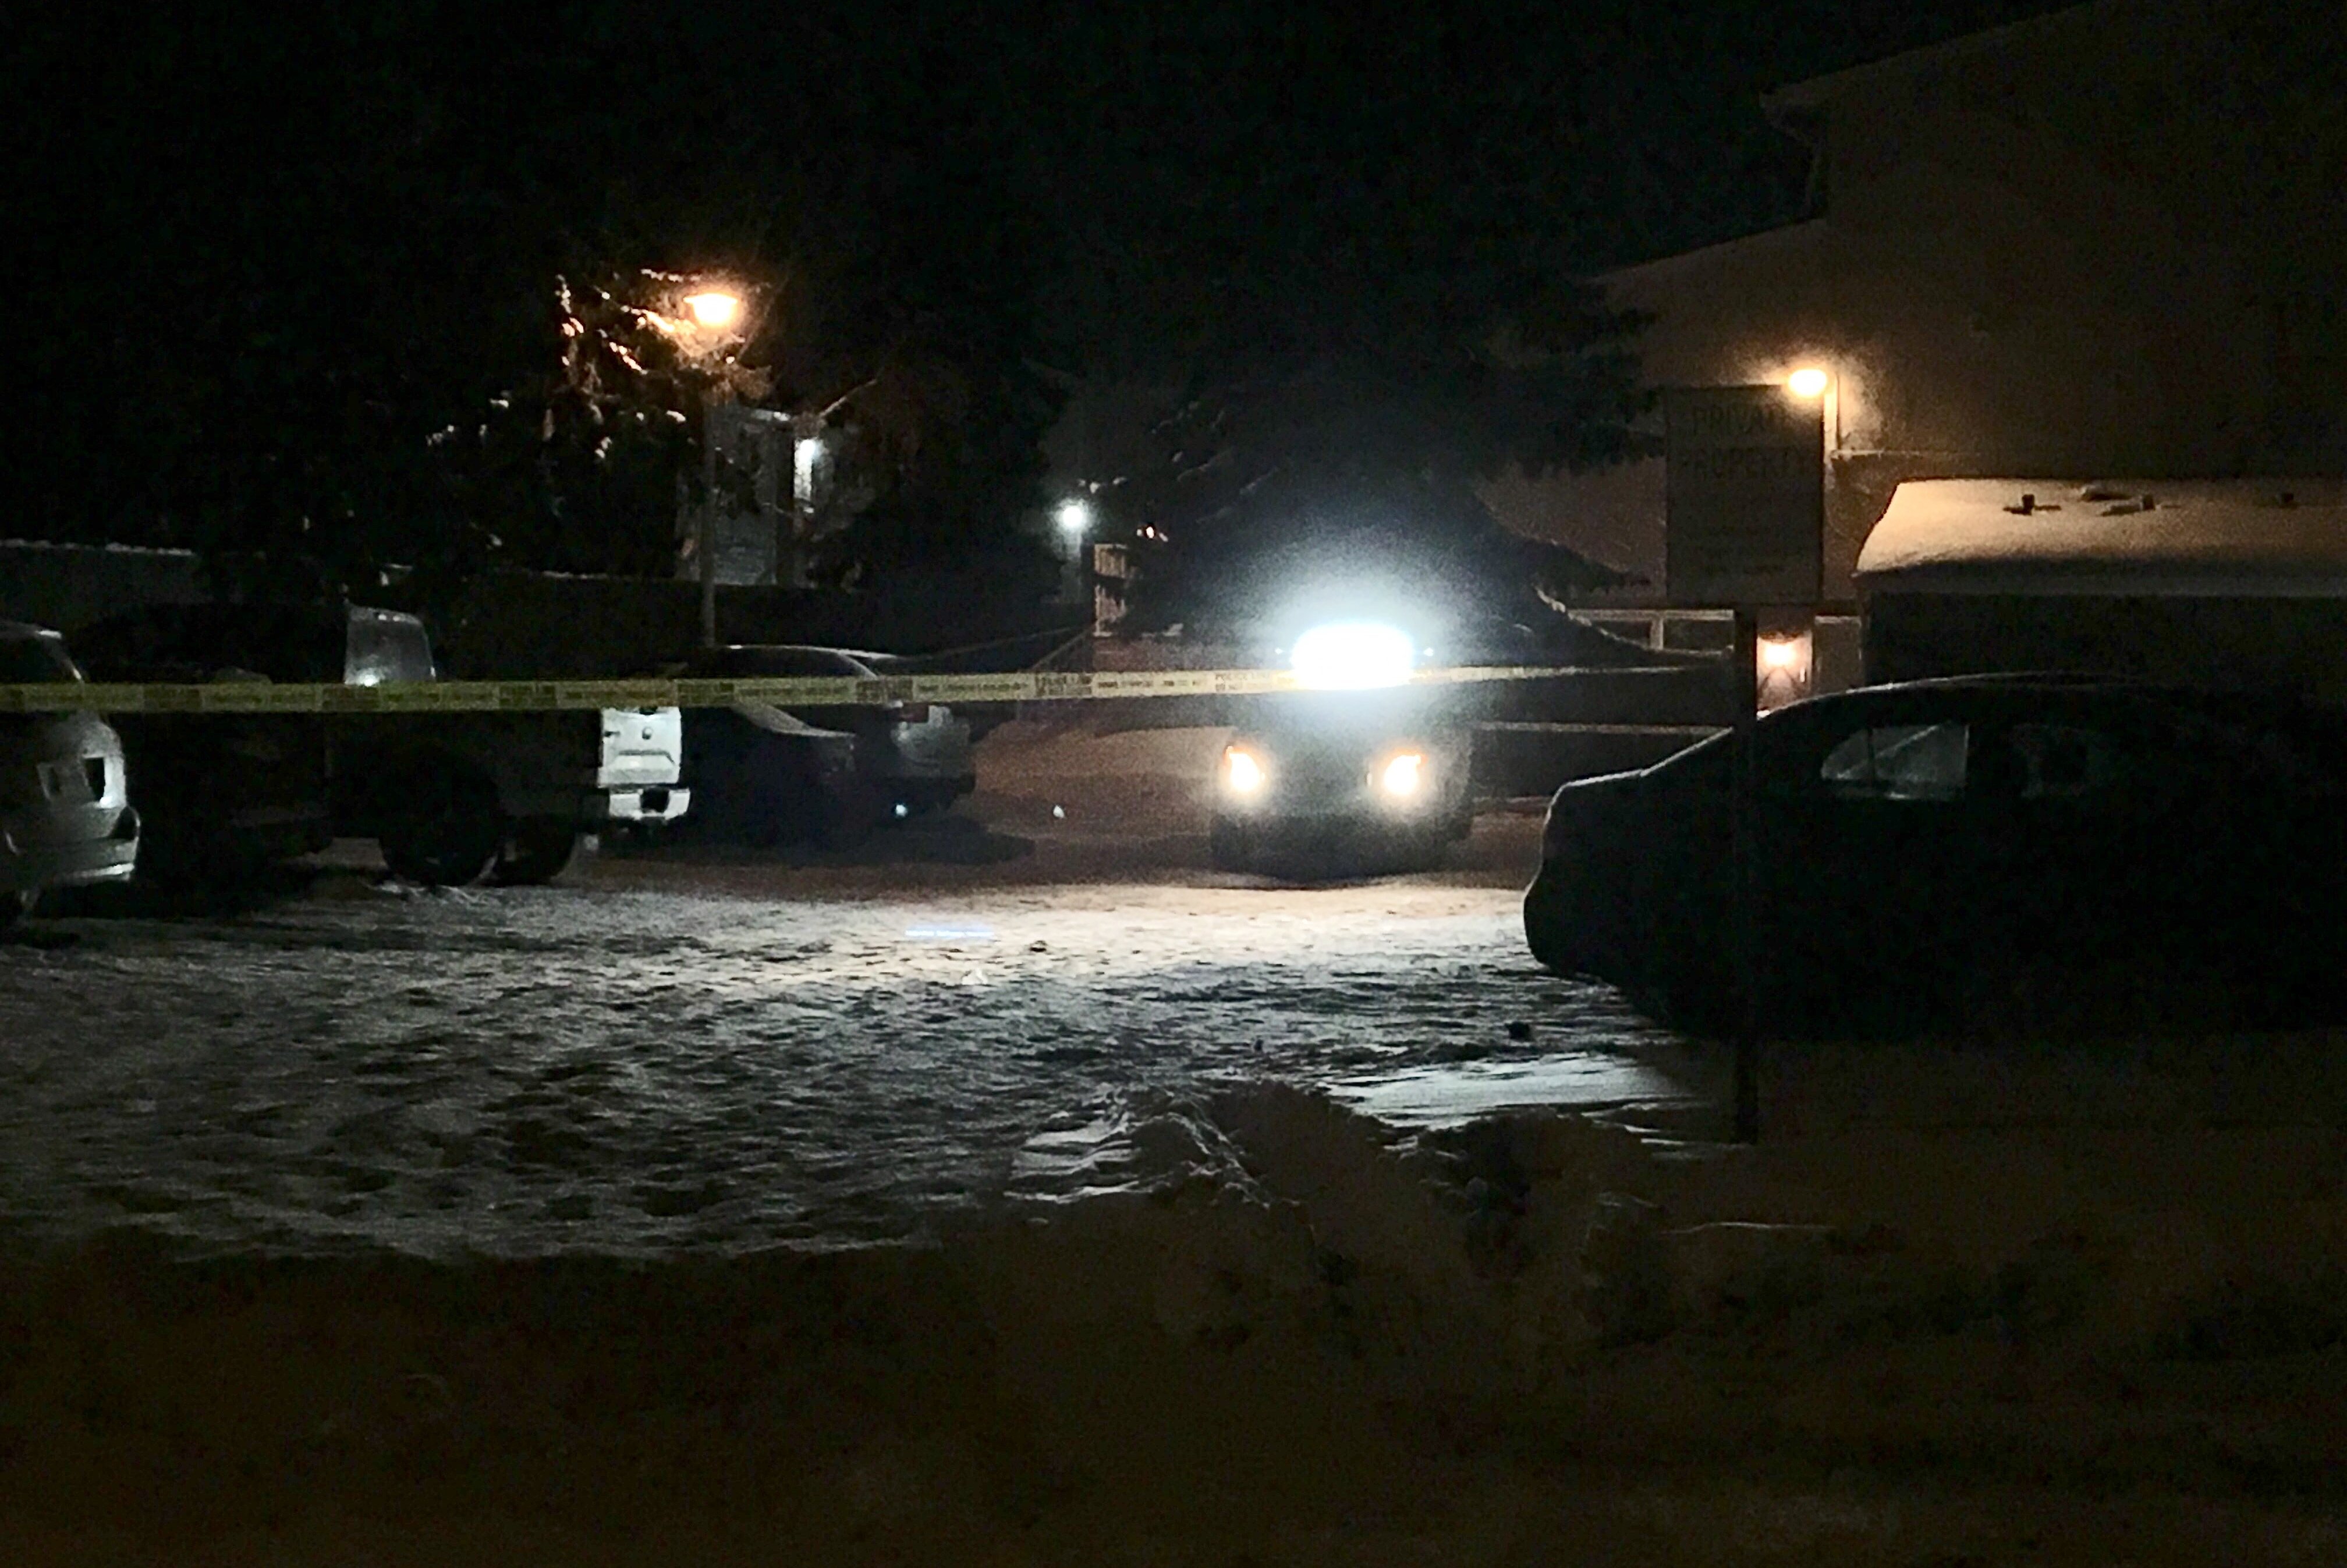 Edmonton police homicide investigators were called to a shooting near the Clareview Place townhouse complex (13570 38 St.) in northeast Edmonton early Tuesday morning.